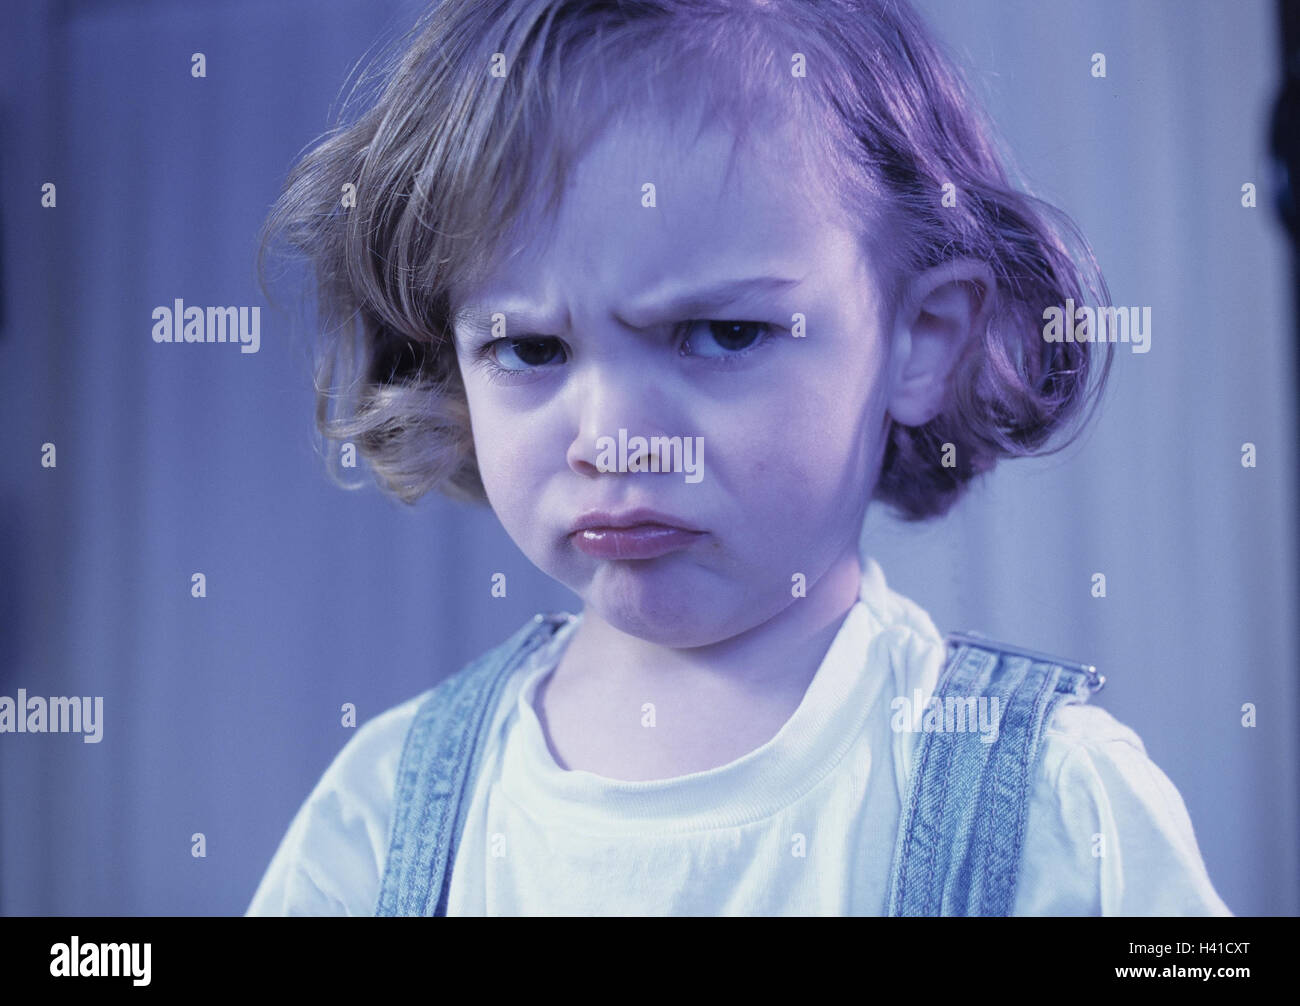 Girls, dissatisfied, facial play, portrait, inside, child, 5 years, discontent, grimace, childhood, furiously, fury, angrily, rage, mood, negatively, expression, sulk Stock Photo